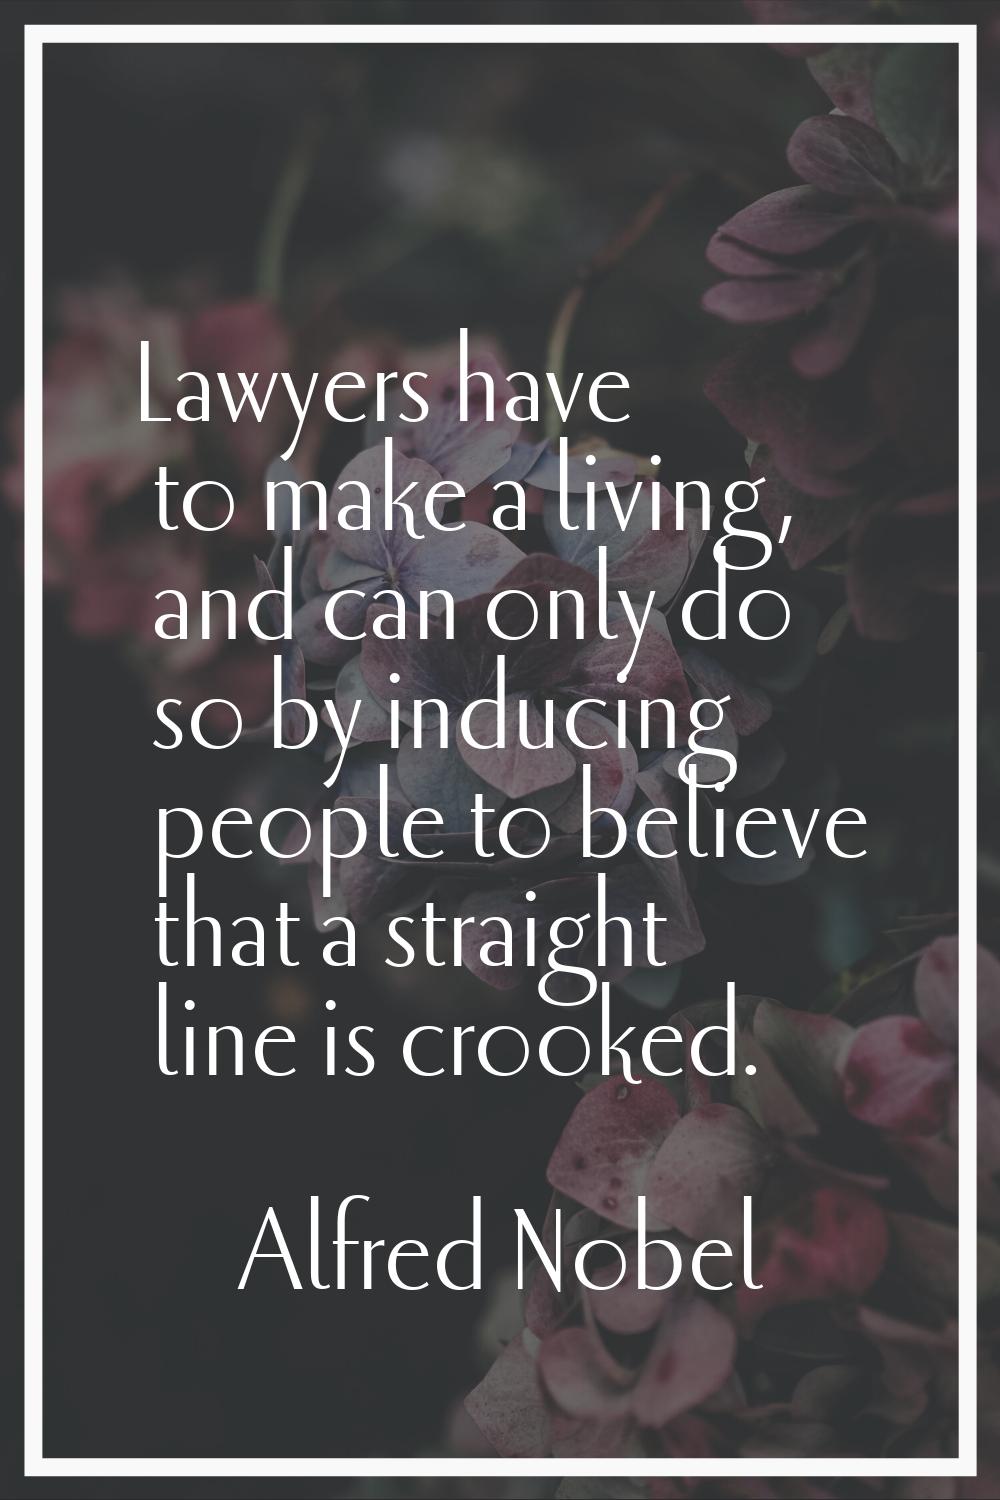 Lawyers have to make a living, and can only do so by inducing people to believe that a straight lin